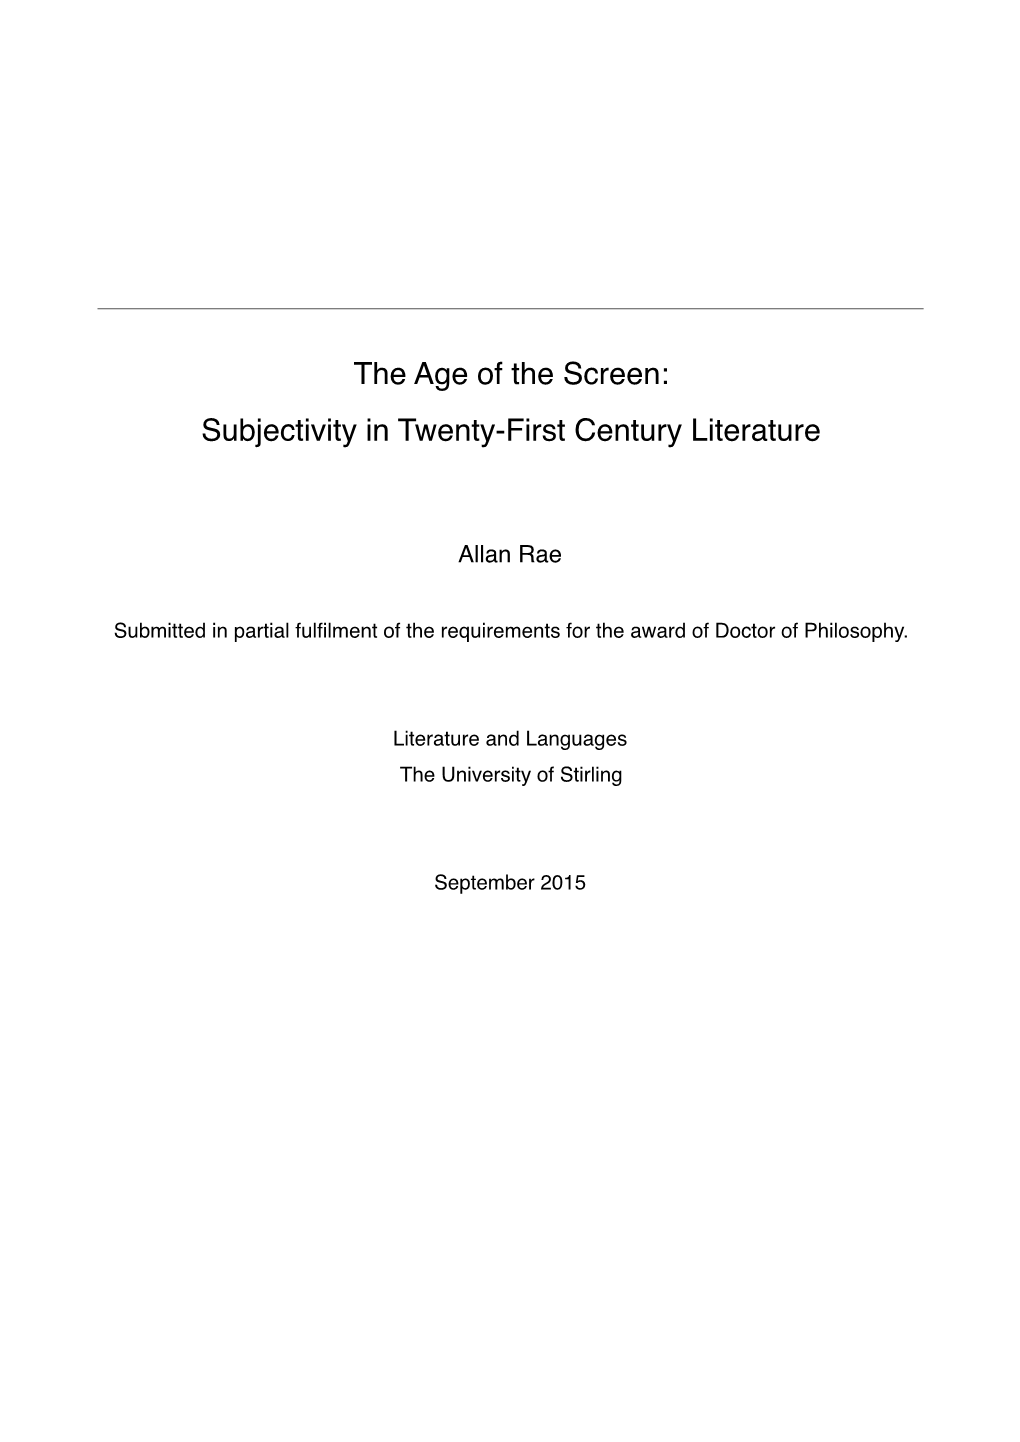 The Age of the Screen/ Subjectivity in Twenty First Century Literature